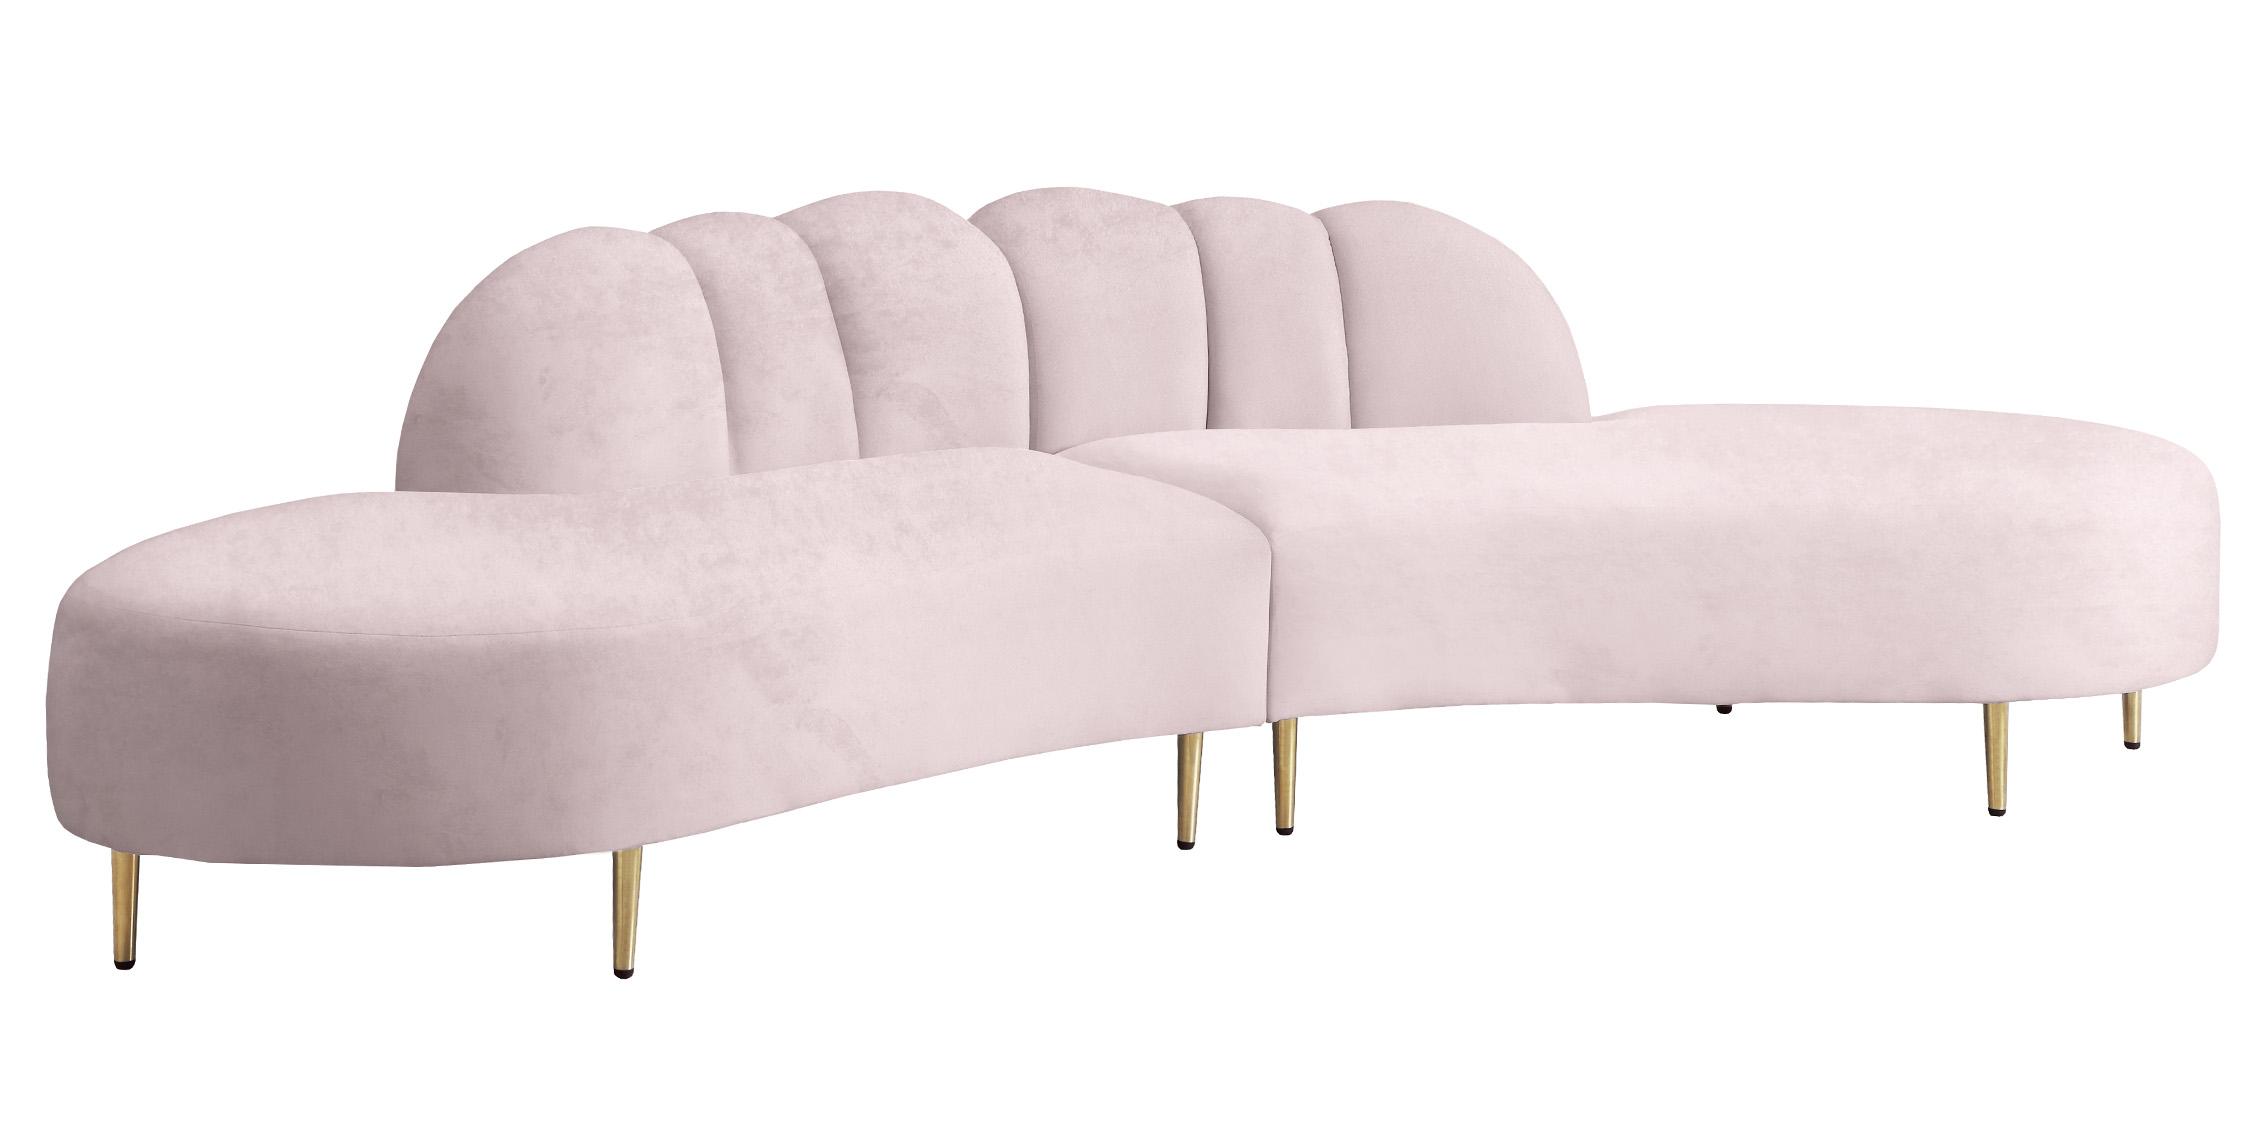 Contemporary, Modern Sectional Sofa DIVINE 618Pink 618Pink-Sectional in Pink Velvet